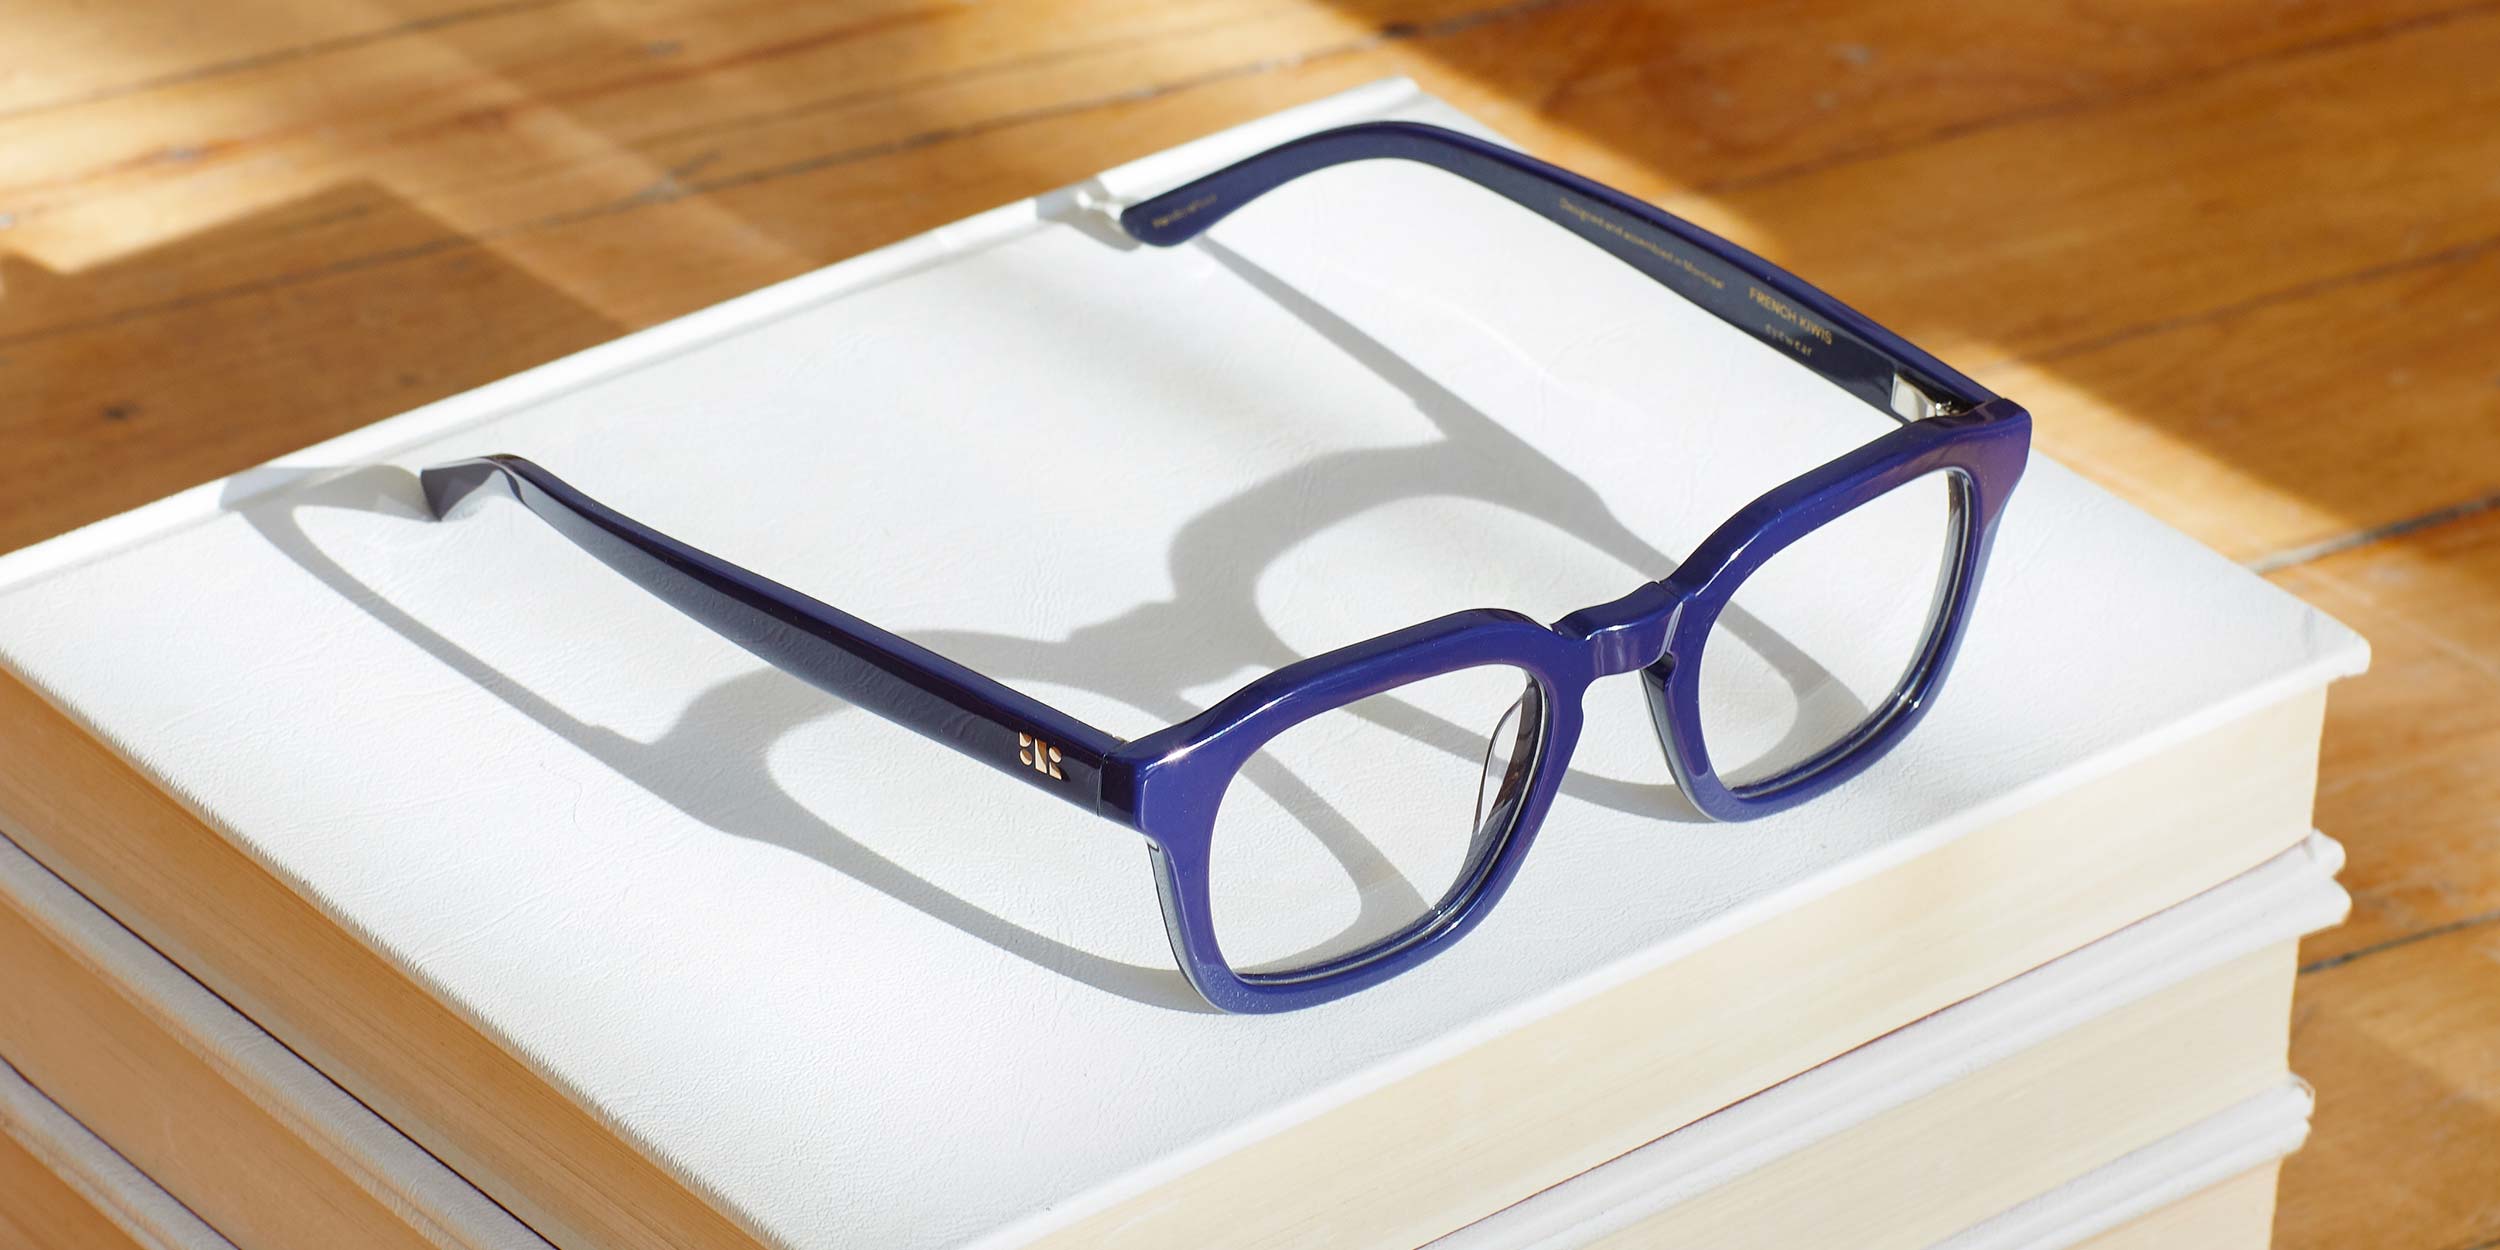 Photo Details of Oscar Black Reading Glasses in a room